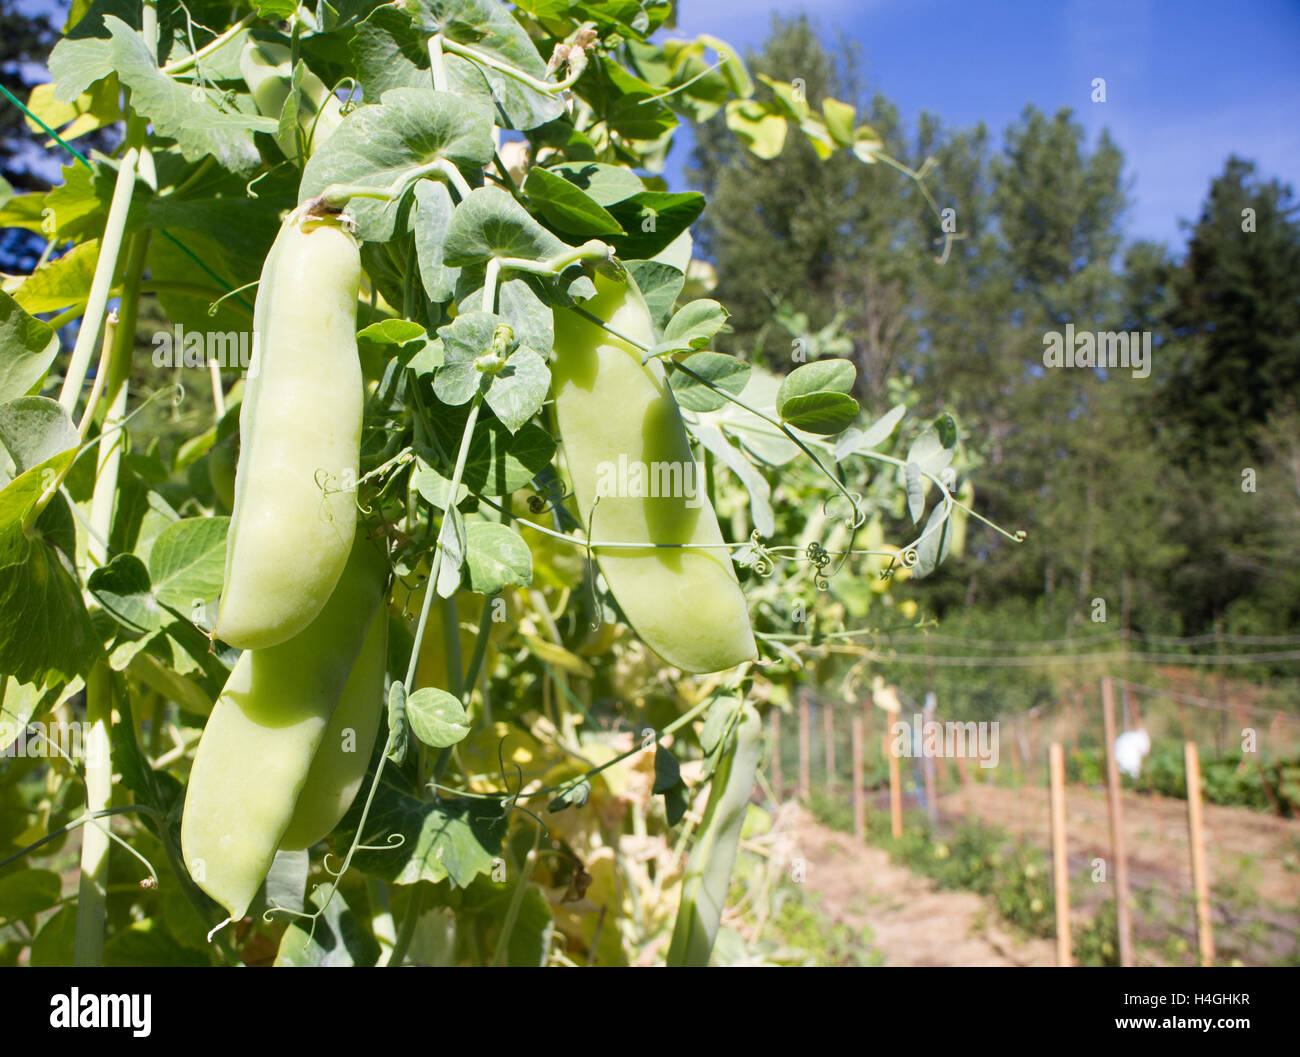 Locally grown green peas growing on the vine on Vancouver Island on Canada, farm inspired Stock Photo